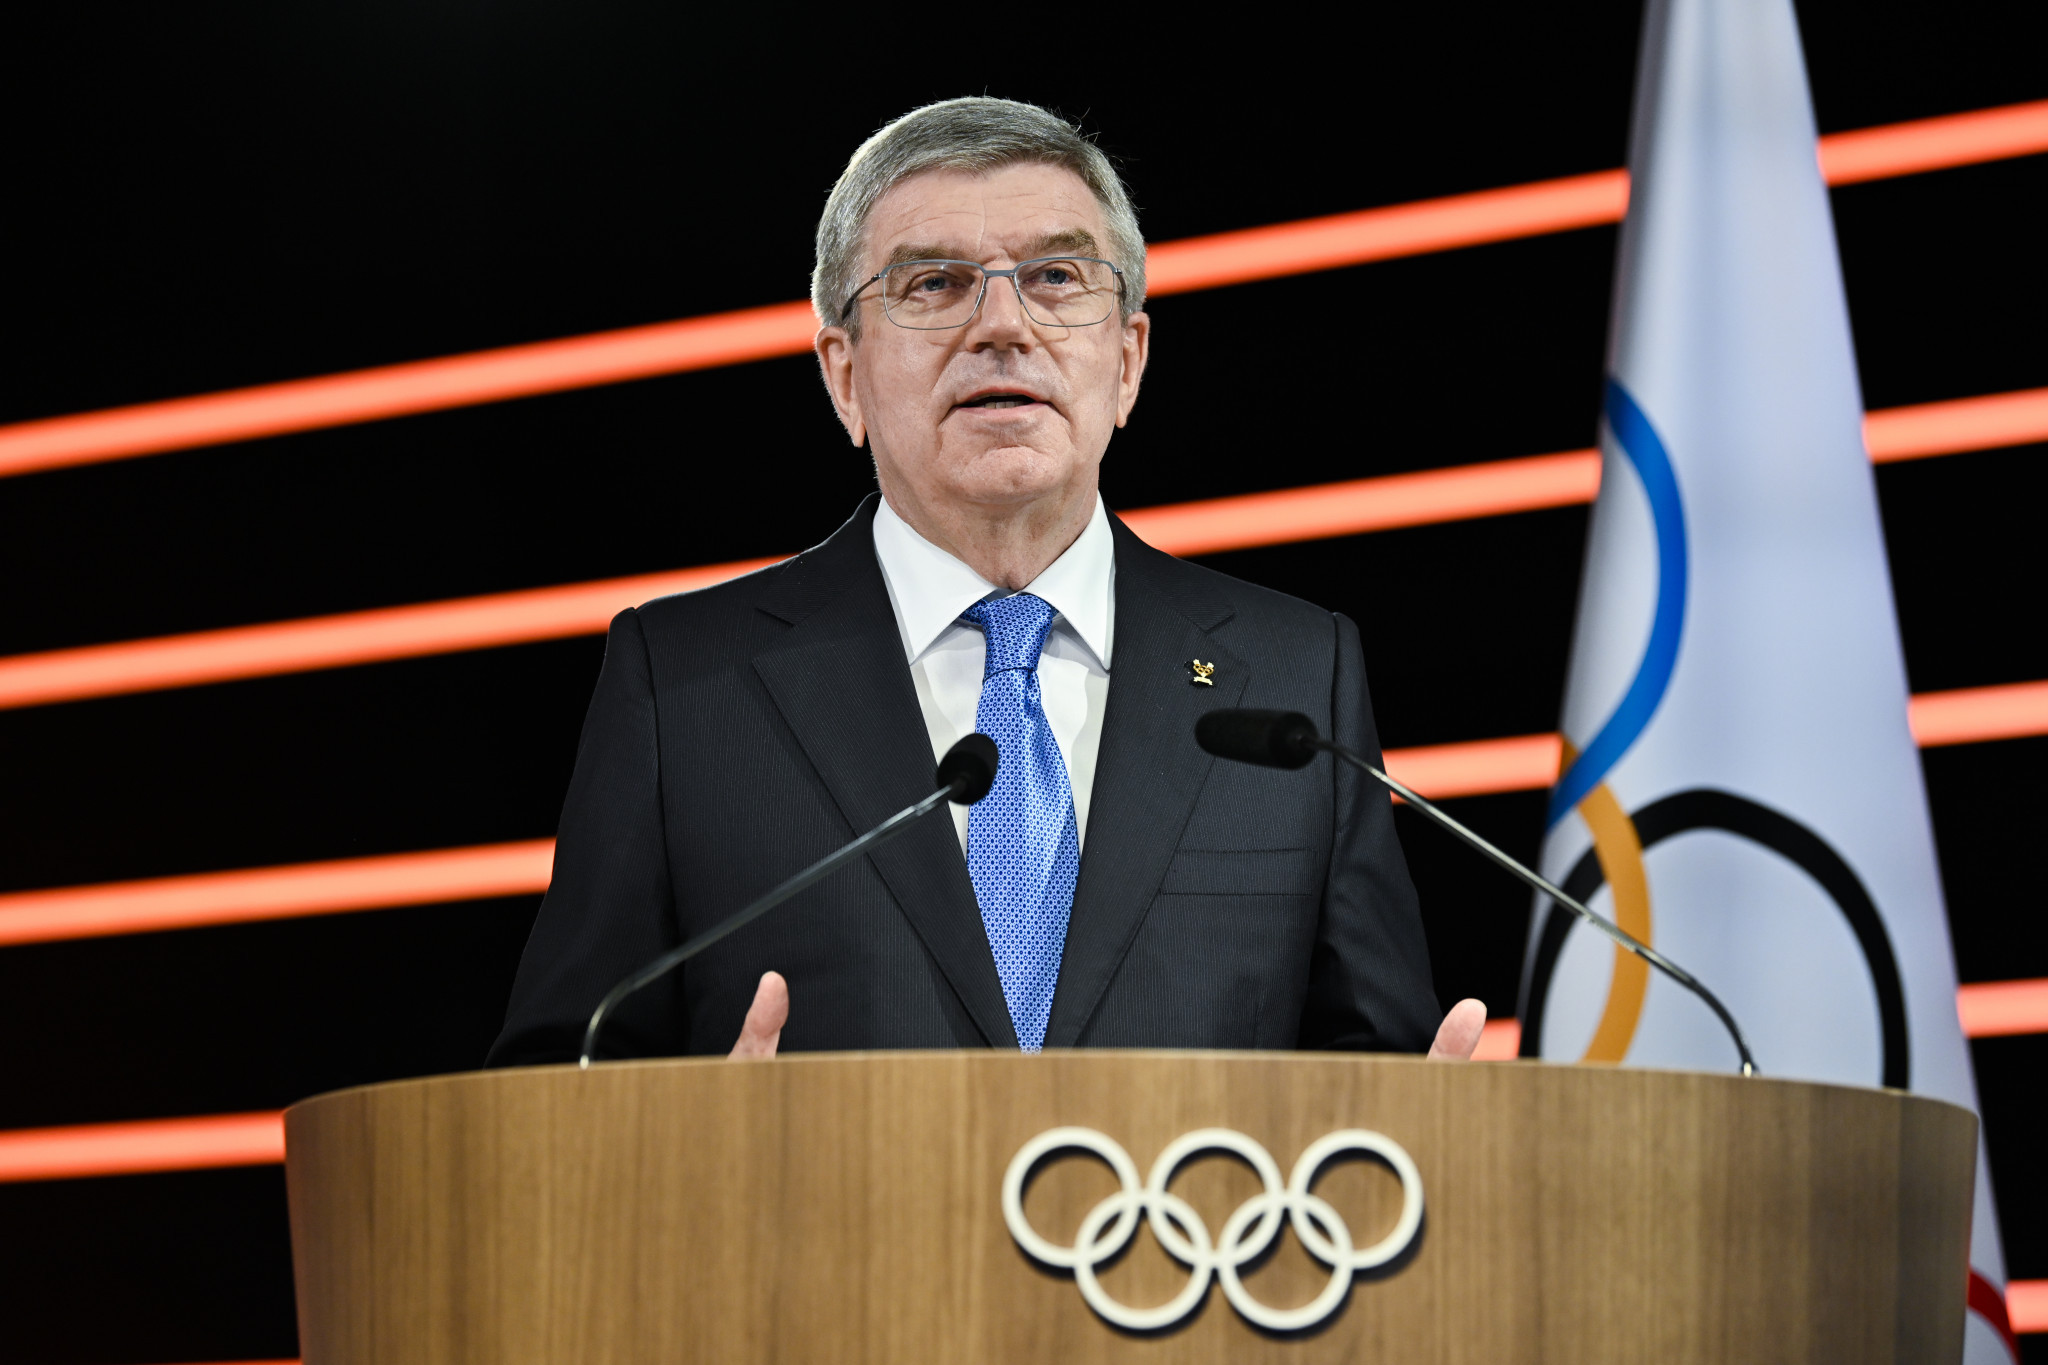 IOC President Thomas Bach told Richard Pound "the IOC and the Olympic Movement have greatly benefited from your leadership" ©IOC/Christophe Moratal